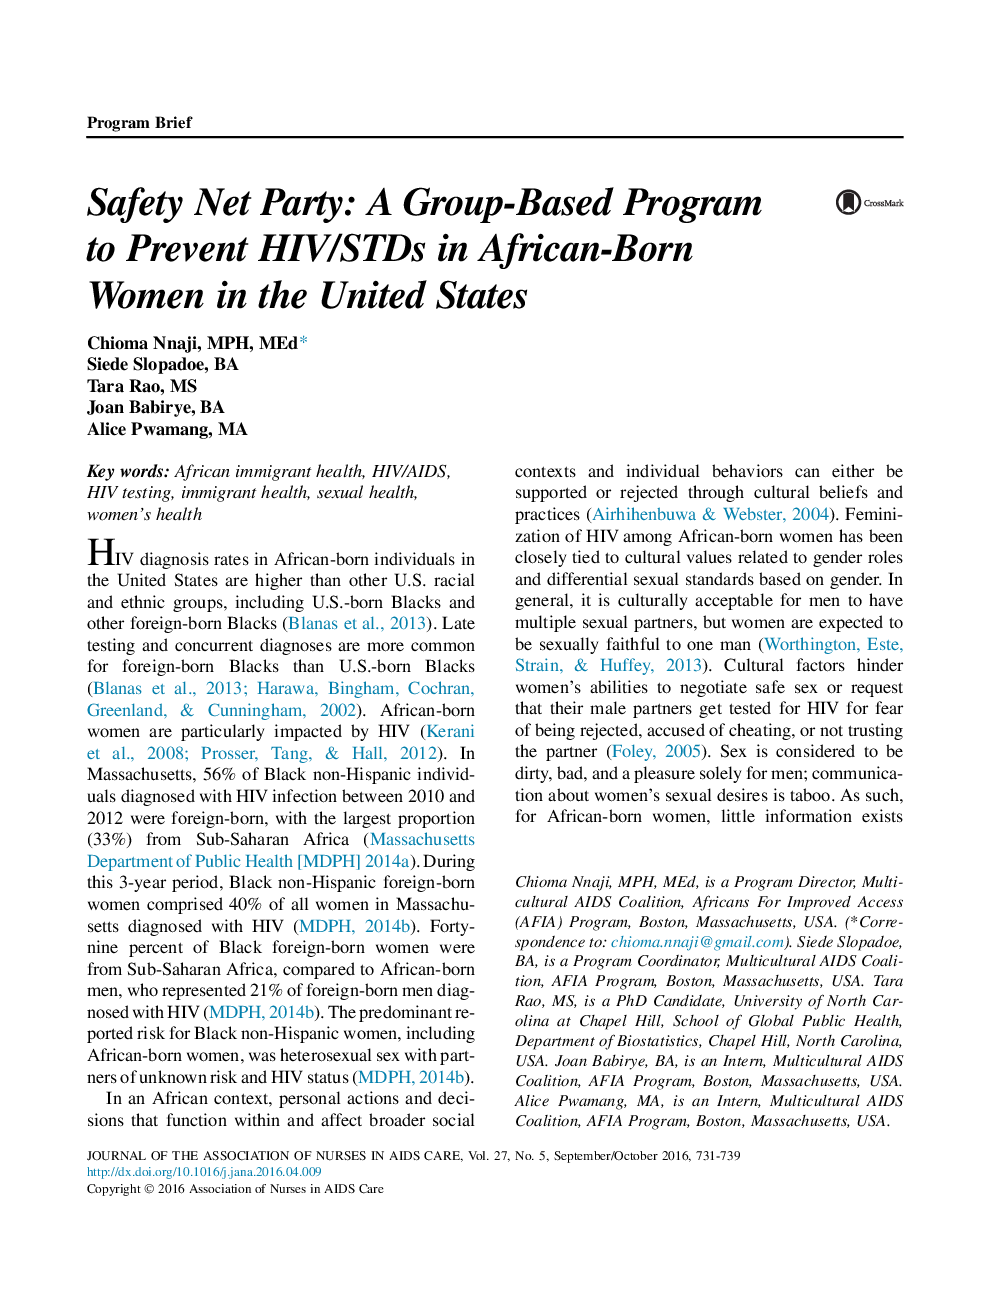 Safety Net Party: A Group-Based Program to Prevent HIV/STDs in African-Born Women in the United States